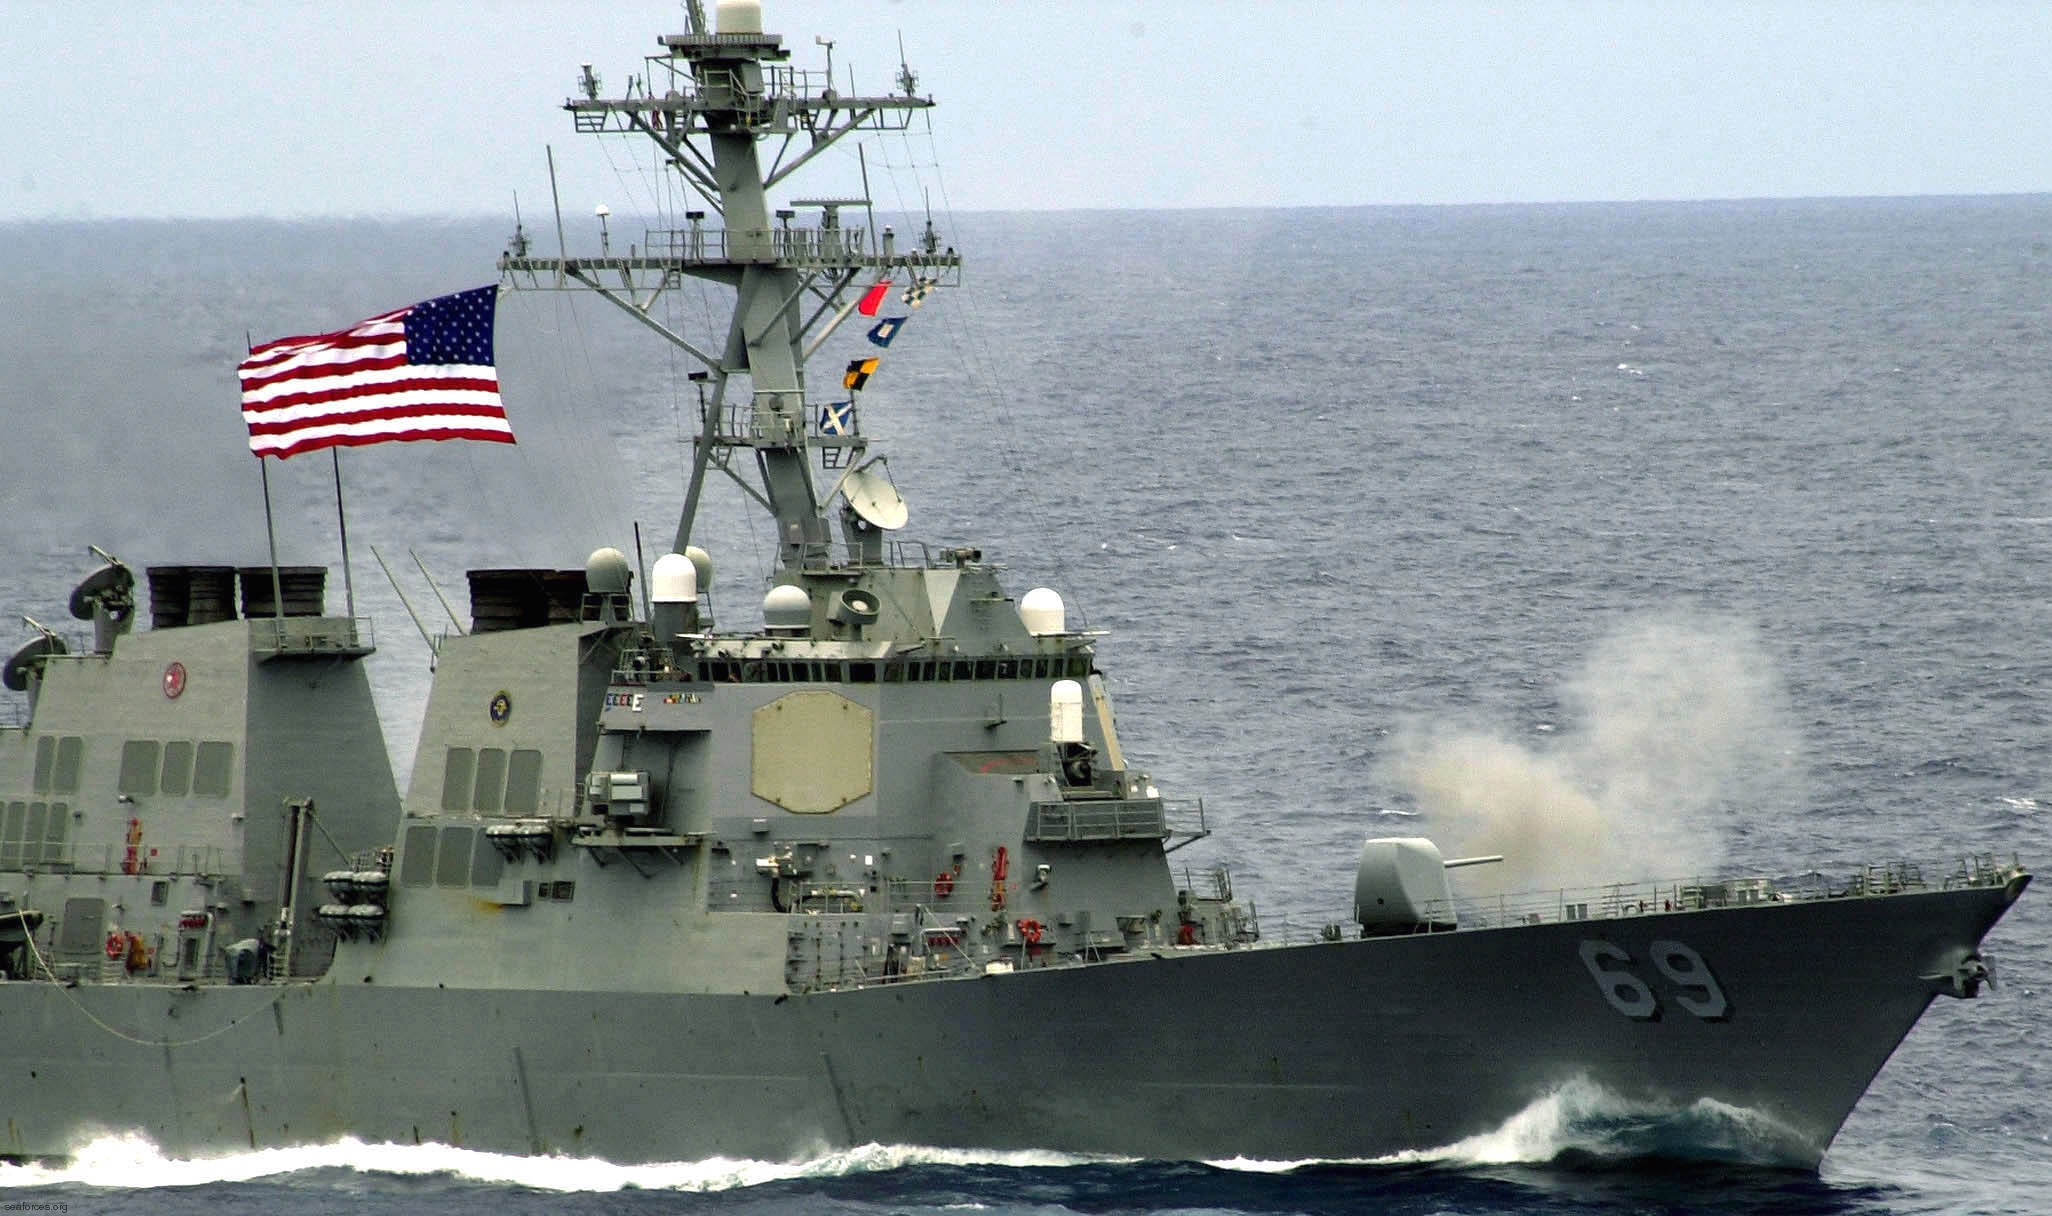 ddg-69 uss milius guided missile destroyer arleigh burke class aegis bmd 35